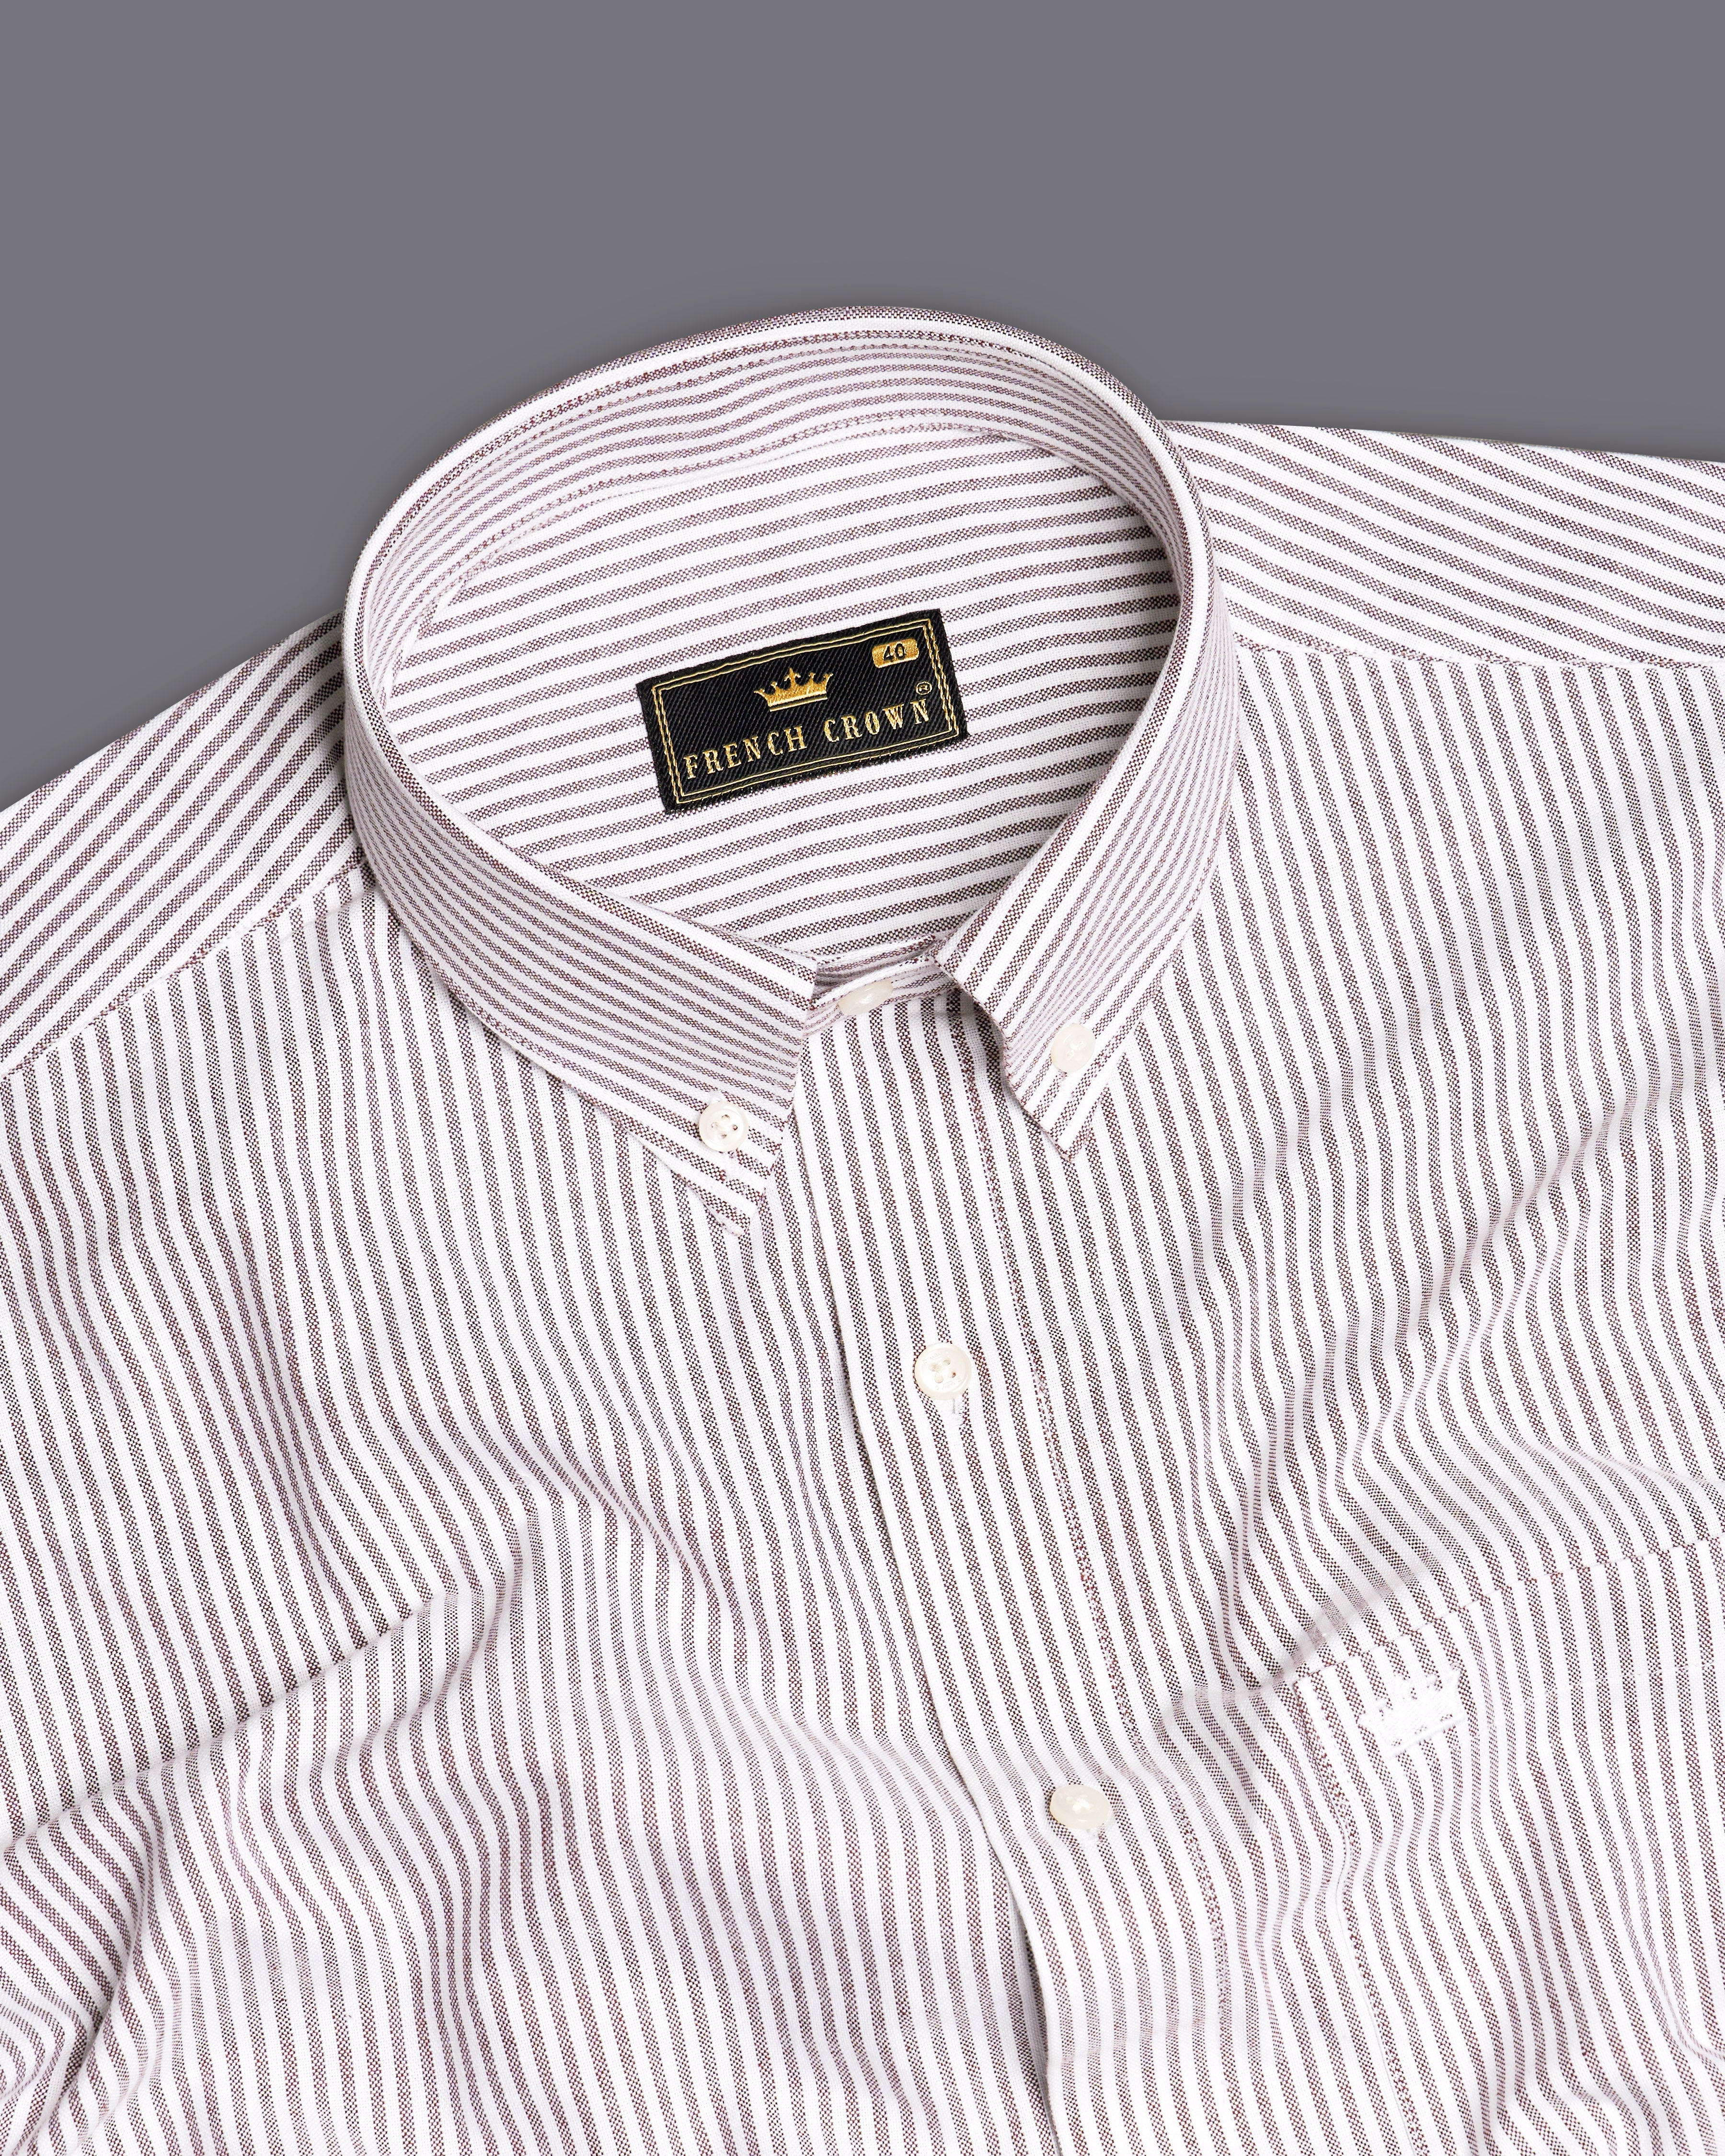 Cafe Noir Brown and White Striped Button Down Royal Oxford Shirt 9725-BD-38, 9725-BD-H-38, 9725-BD-39, 9725-BD-H-39, 9725-BD-40, 9725-BD-H-40, 9725-BD-42, 9725-BD-H-42, 9725-BD-44, 9725-BD-H-44, 9725-BD-46, 9725-BD-H-46, 9725-BD-48, 9725-BD-H-48, 9725-BD-50, 9725-BD-H-50, 9725-BD-52, 9725-BD-H-52